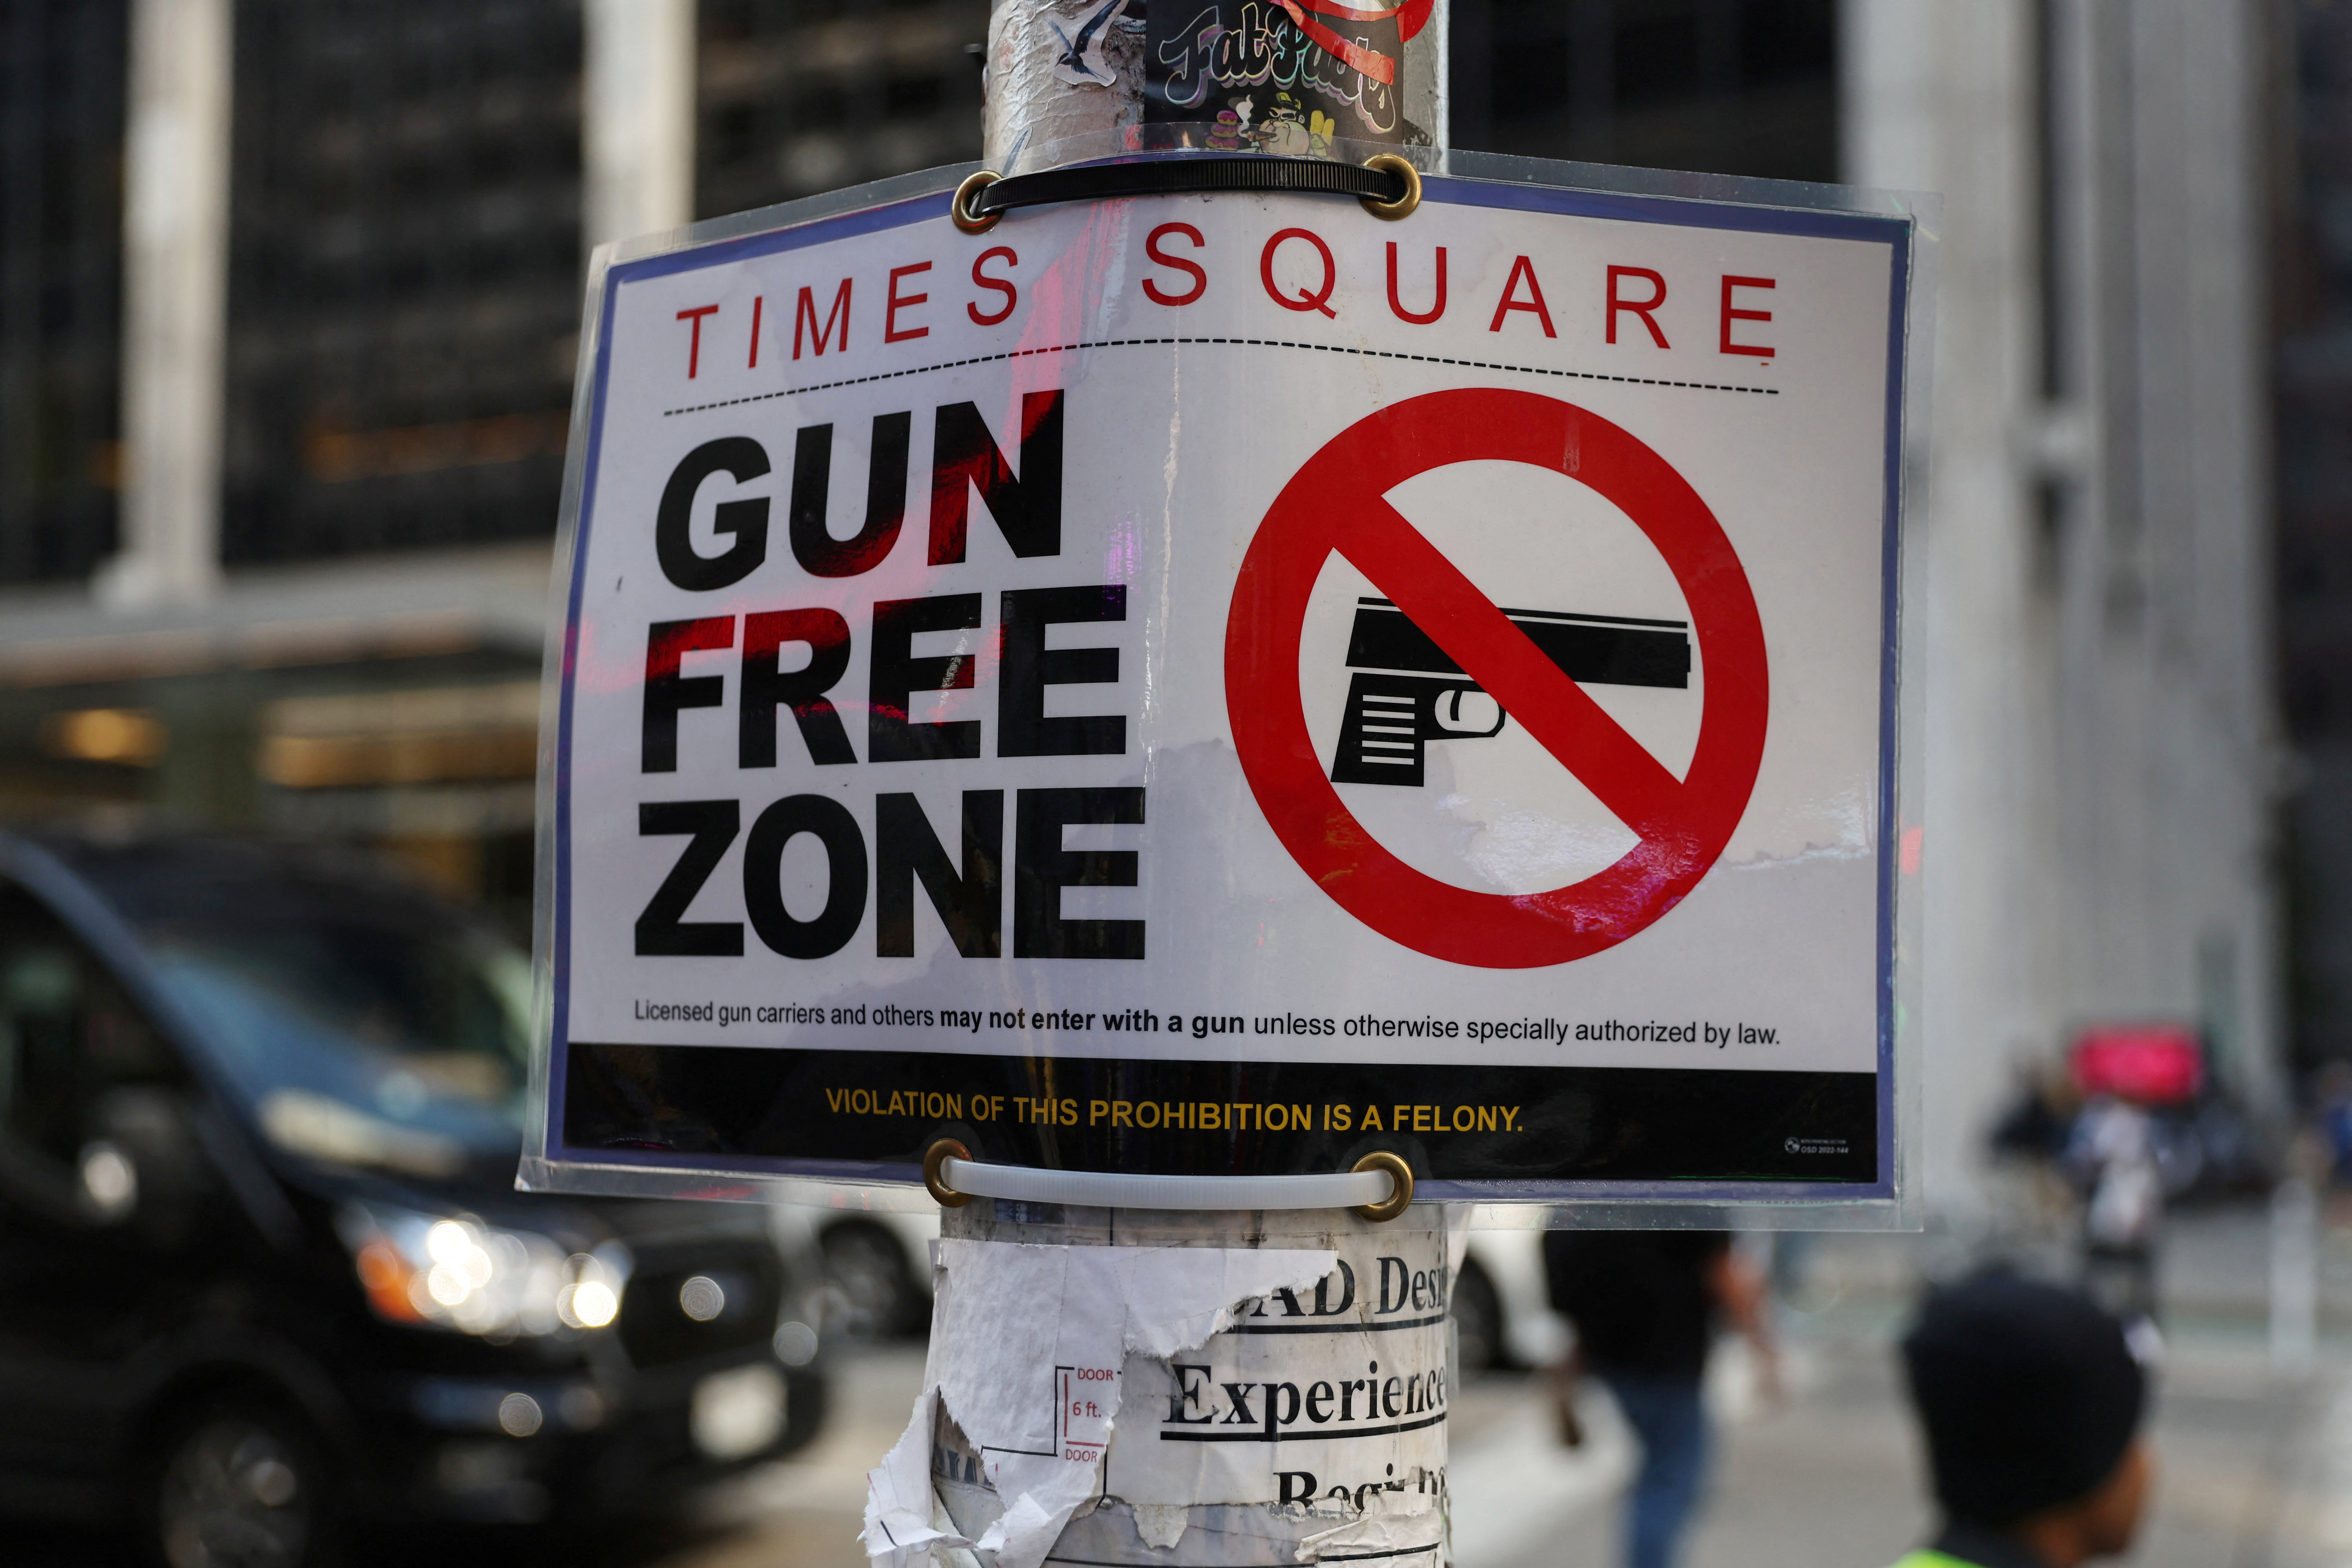 Times Square Gun Free Zone sign hangs from a light pole on 6th avenue in New York City